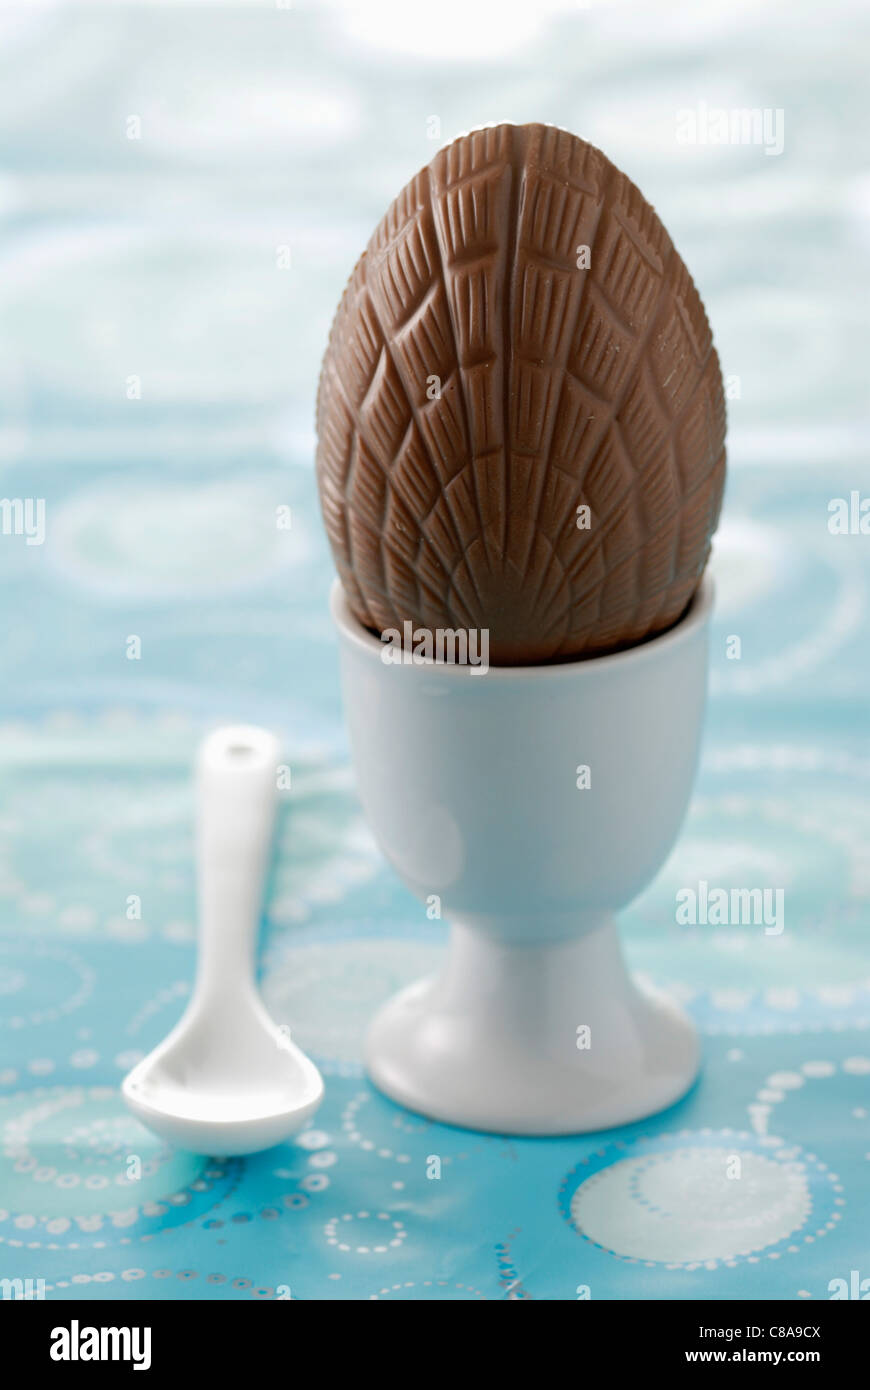 Chocolate egg in eggcup Stock Photo